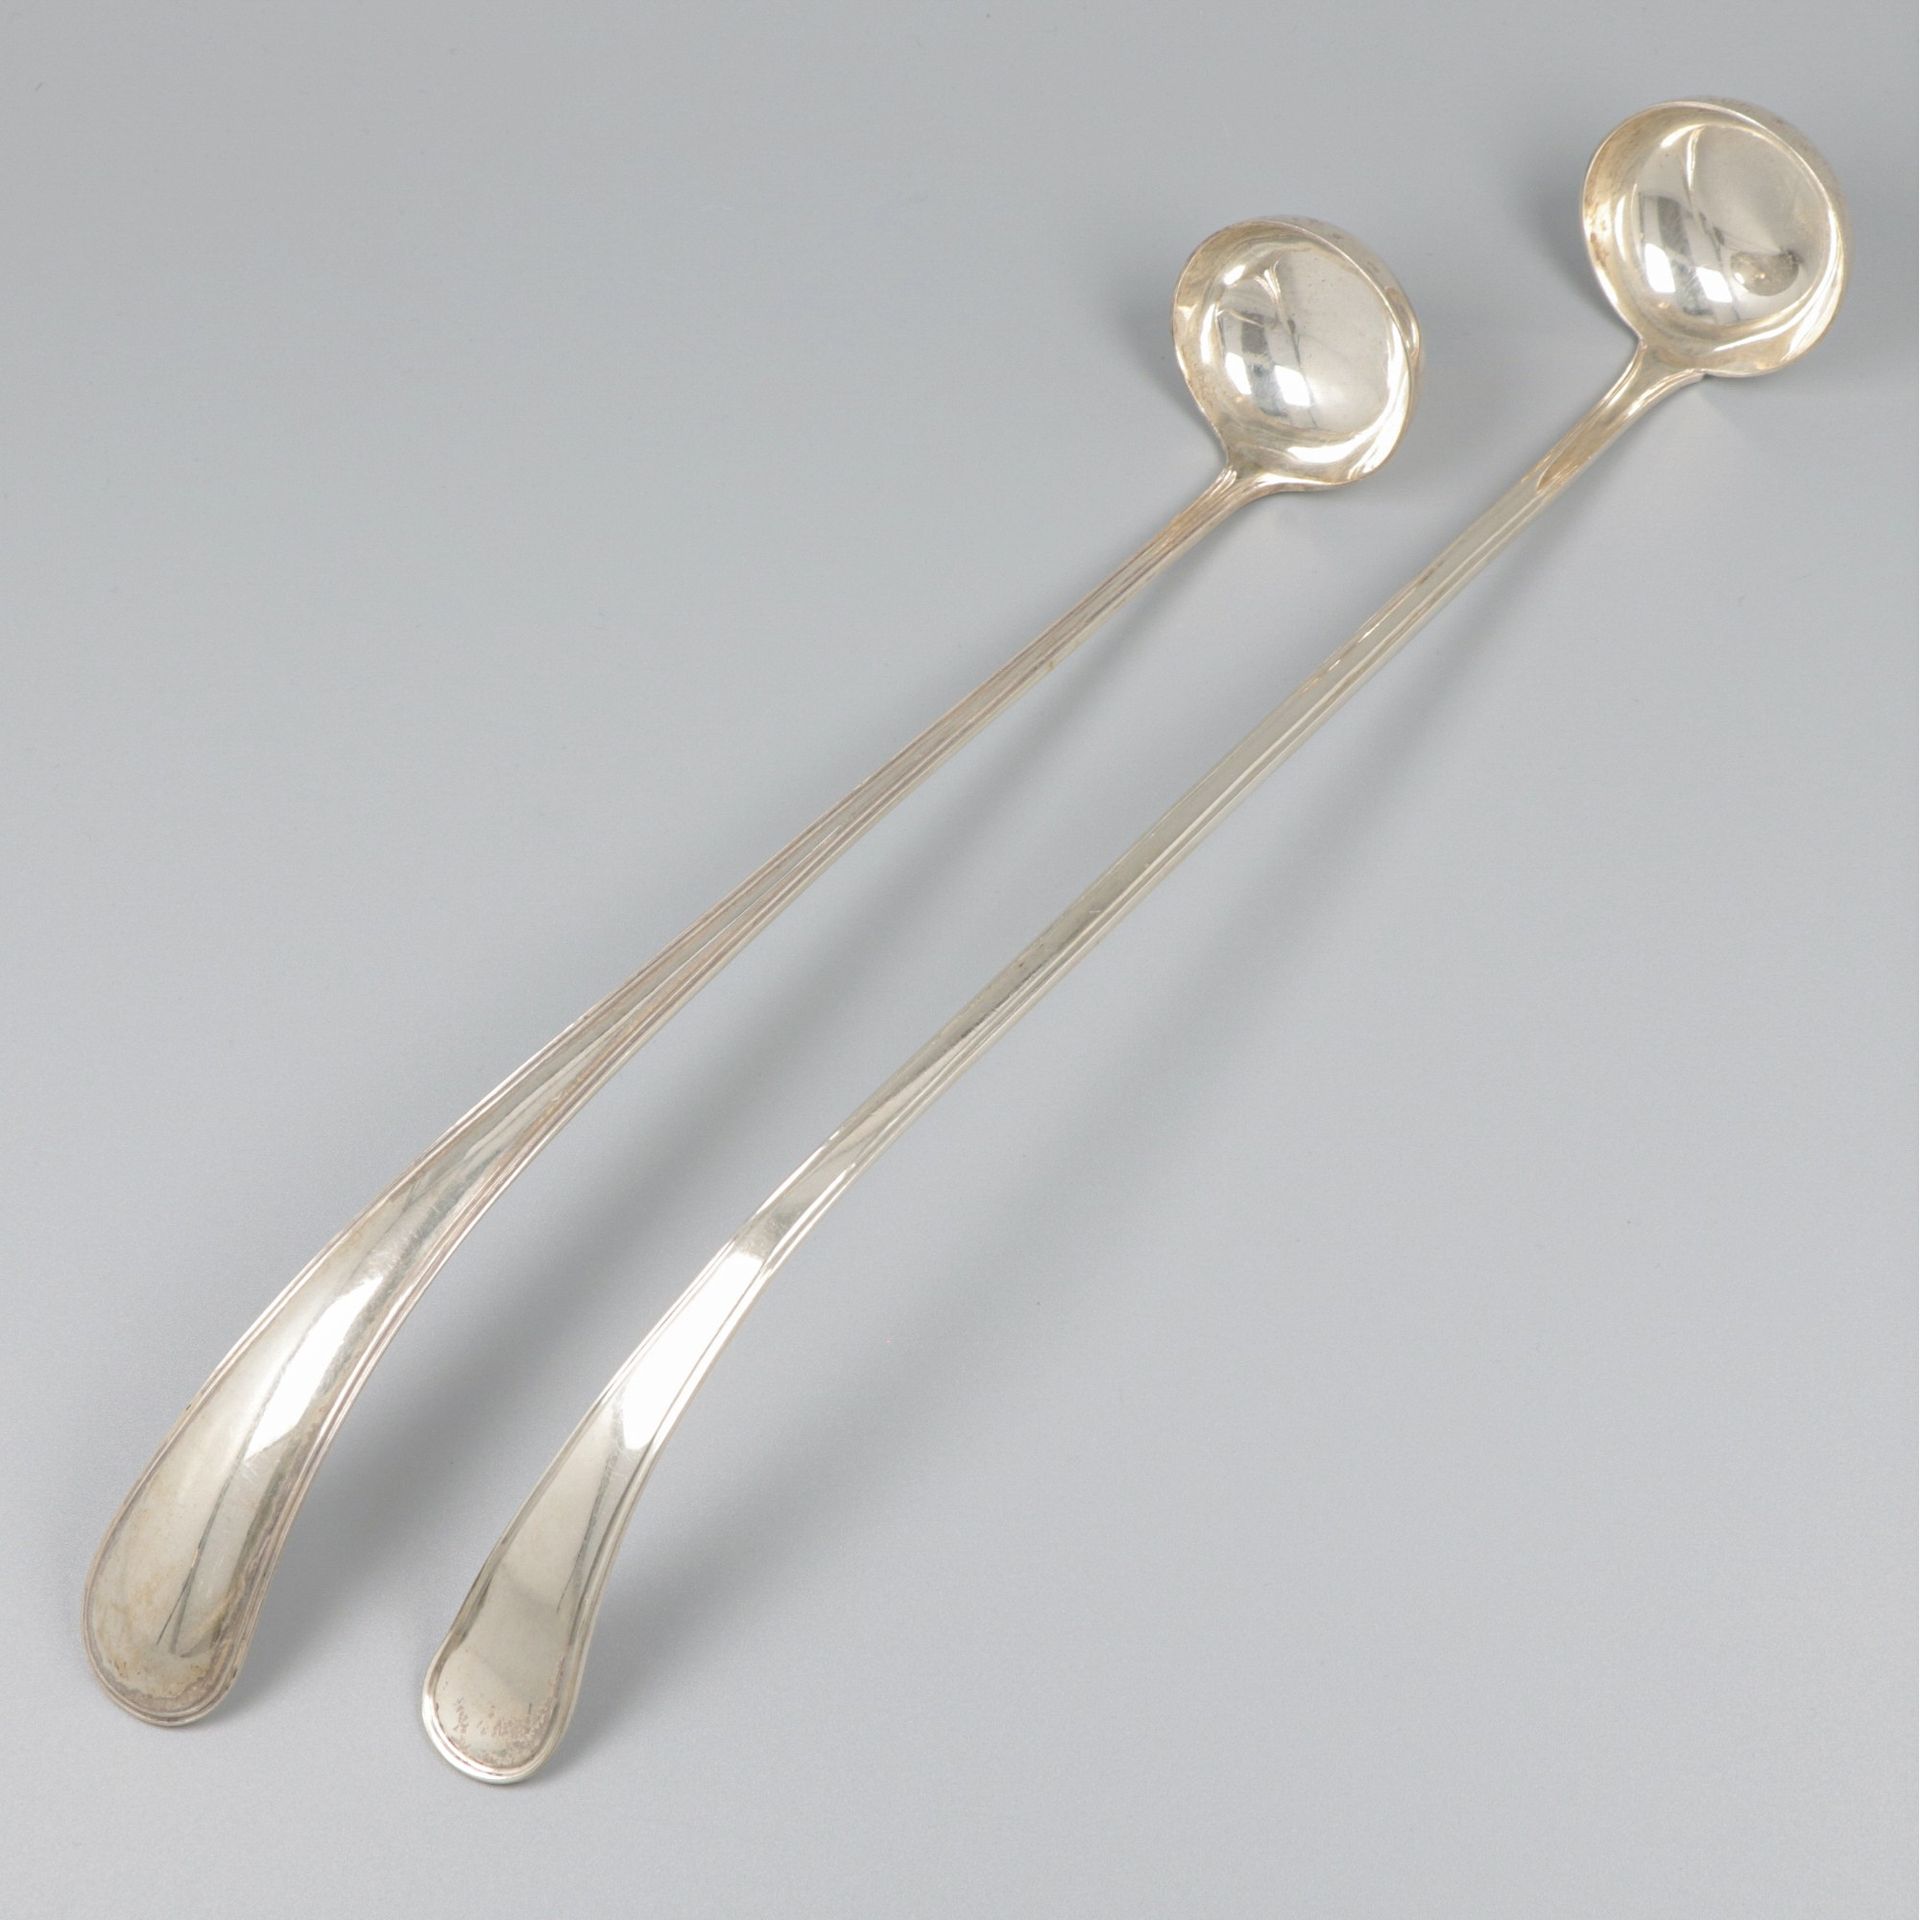 2-piece lot bowl spoons silver. Both in "Rondfilet" or Round Filet. The Netherla&hellip;